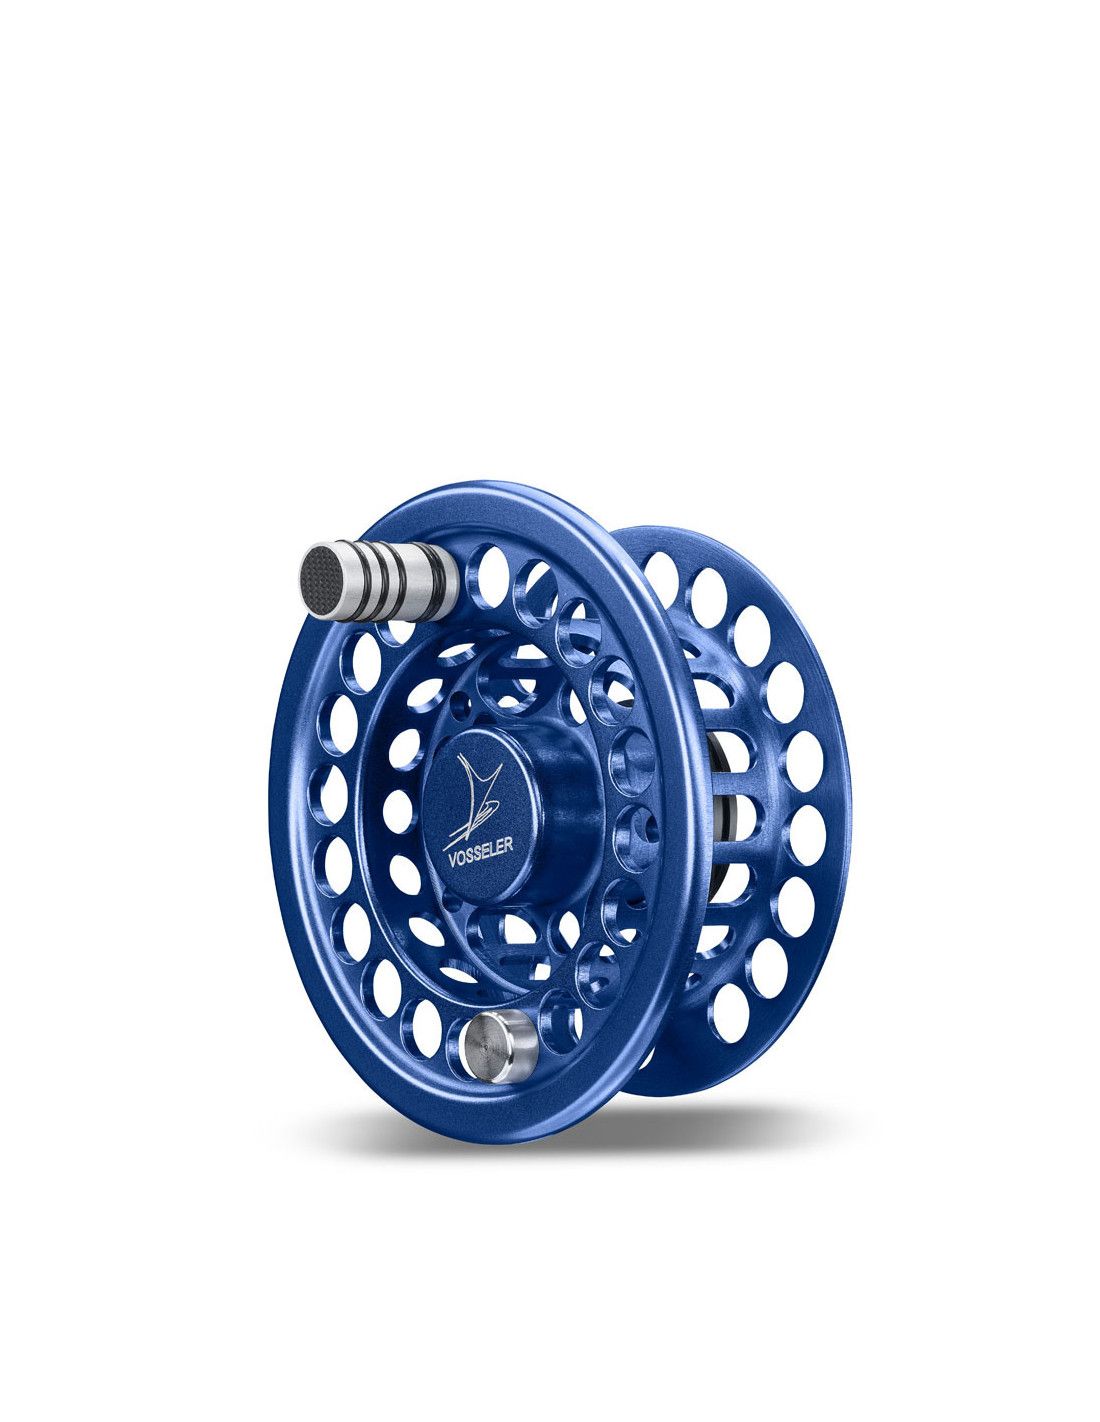 Spare spool DC² for Fly fishing